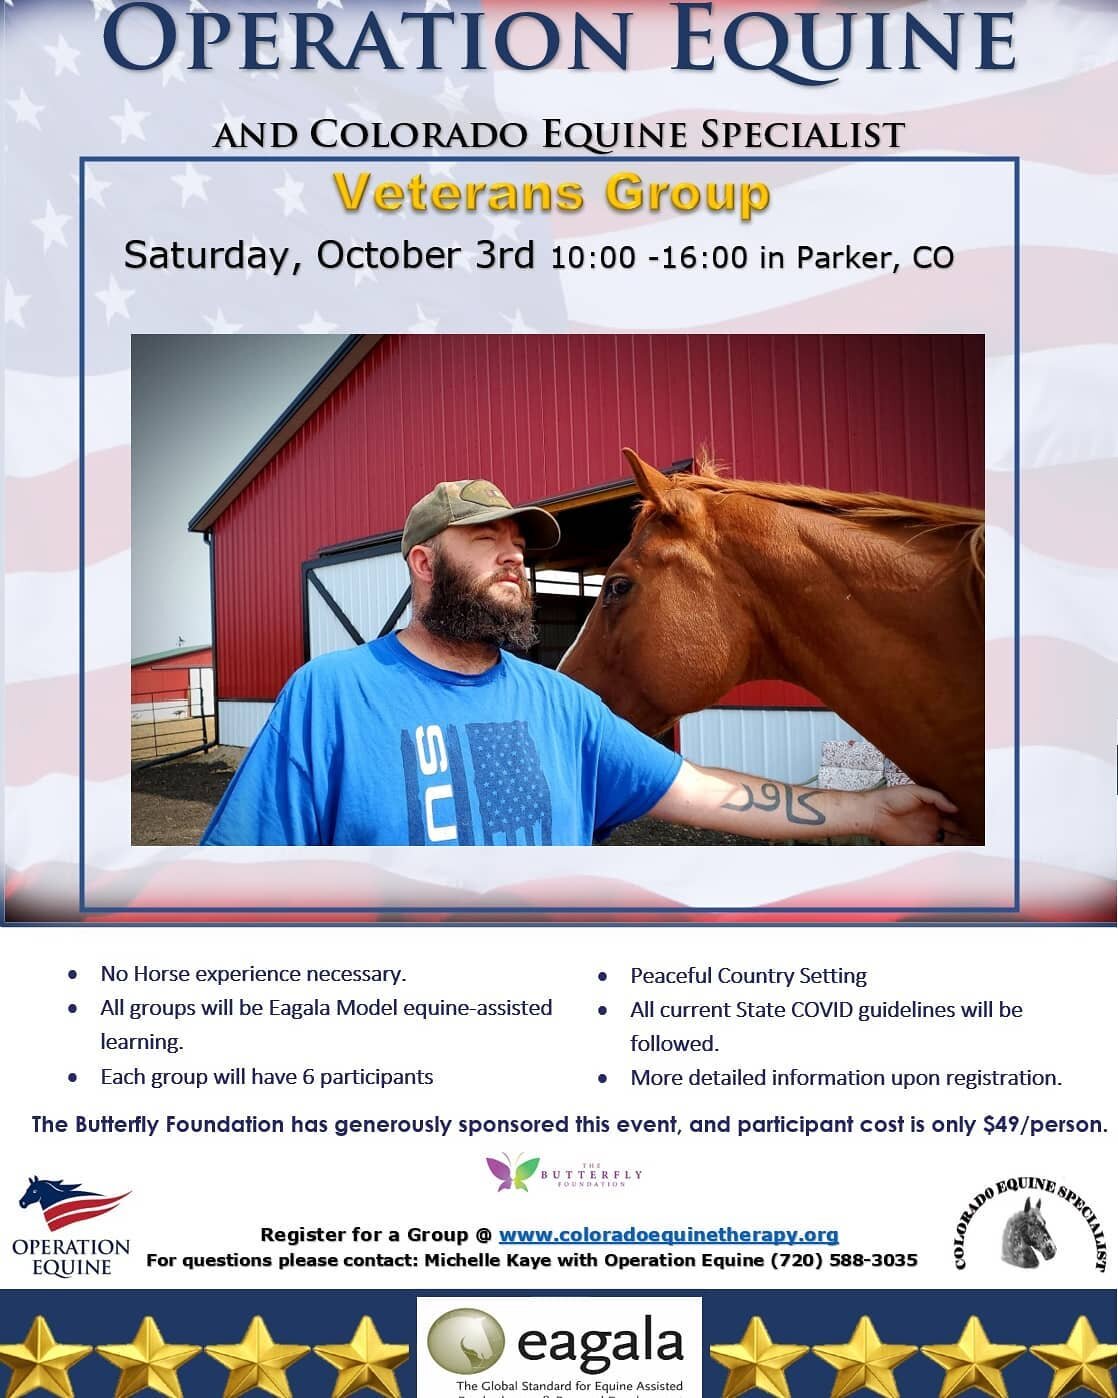 The BBQ was a blast! Thanks for all that came and American Legion Post 82 - Elizabeth, CO for grilling!
We are Starting off our Veteran Series with the Veteran Group. I'm a veteran spouse and Colorado Equine Specialist is Veteran owned. My husband an